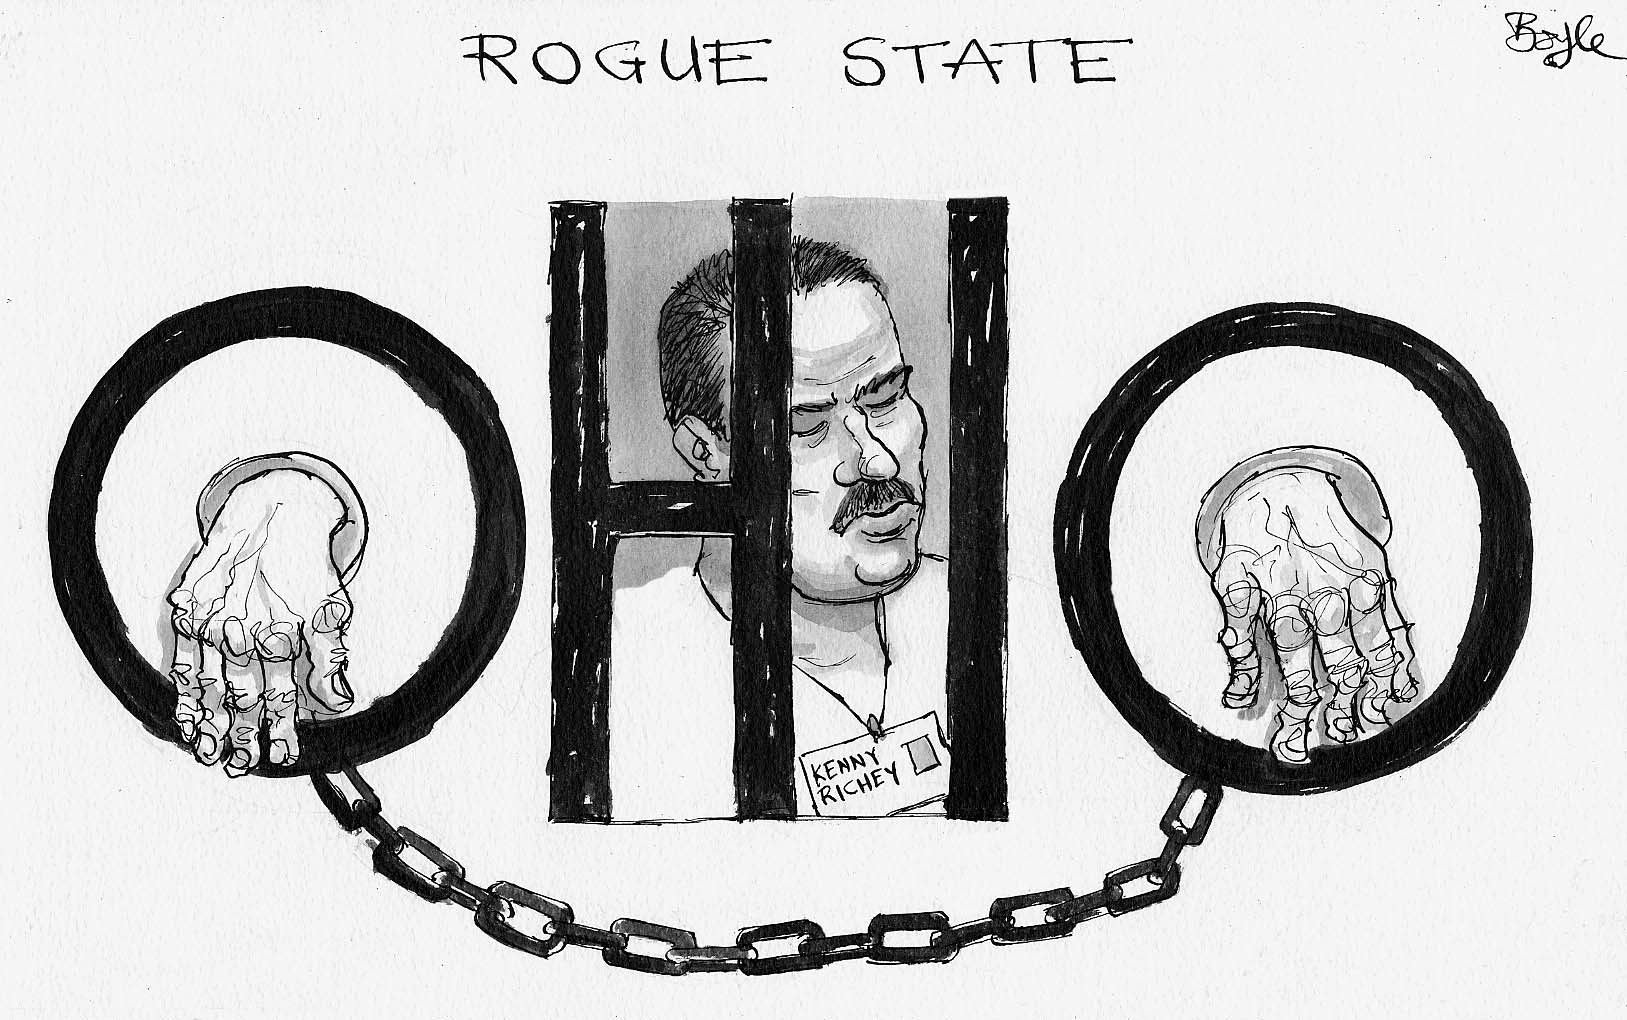 Rogue State: sketch showing the word "OHIO" as prison bars with Kenny manacled behind them